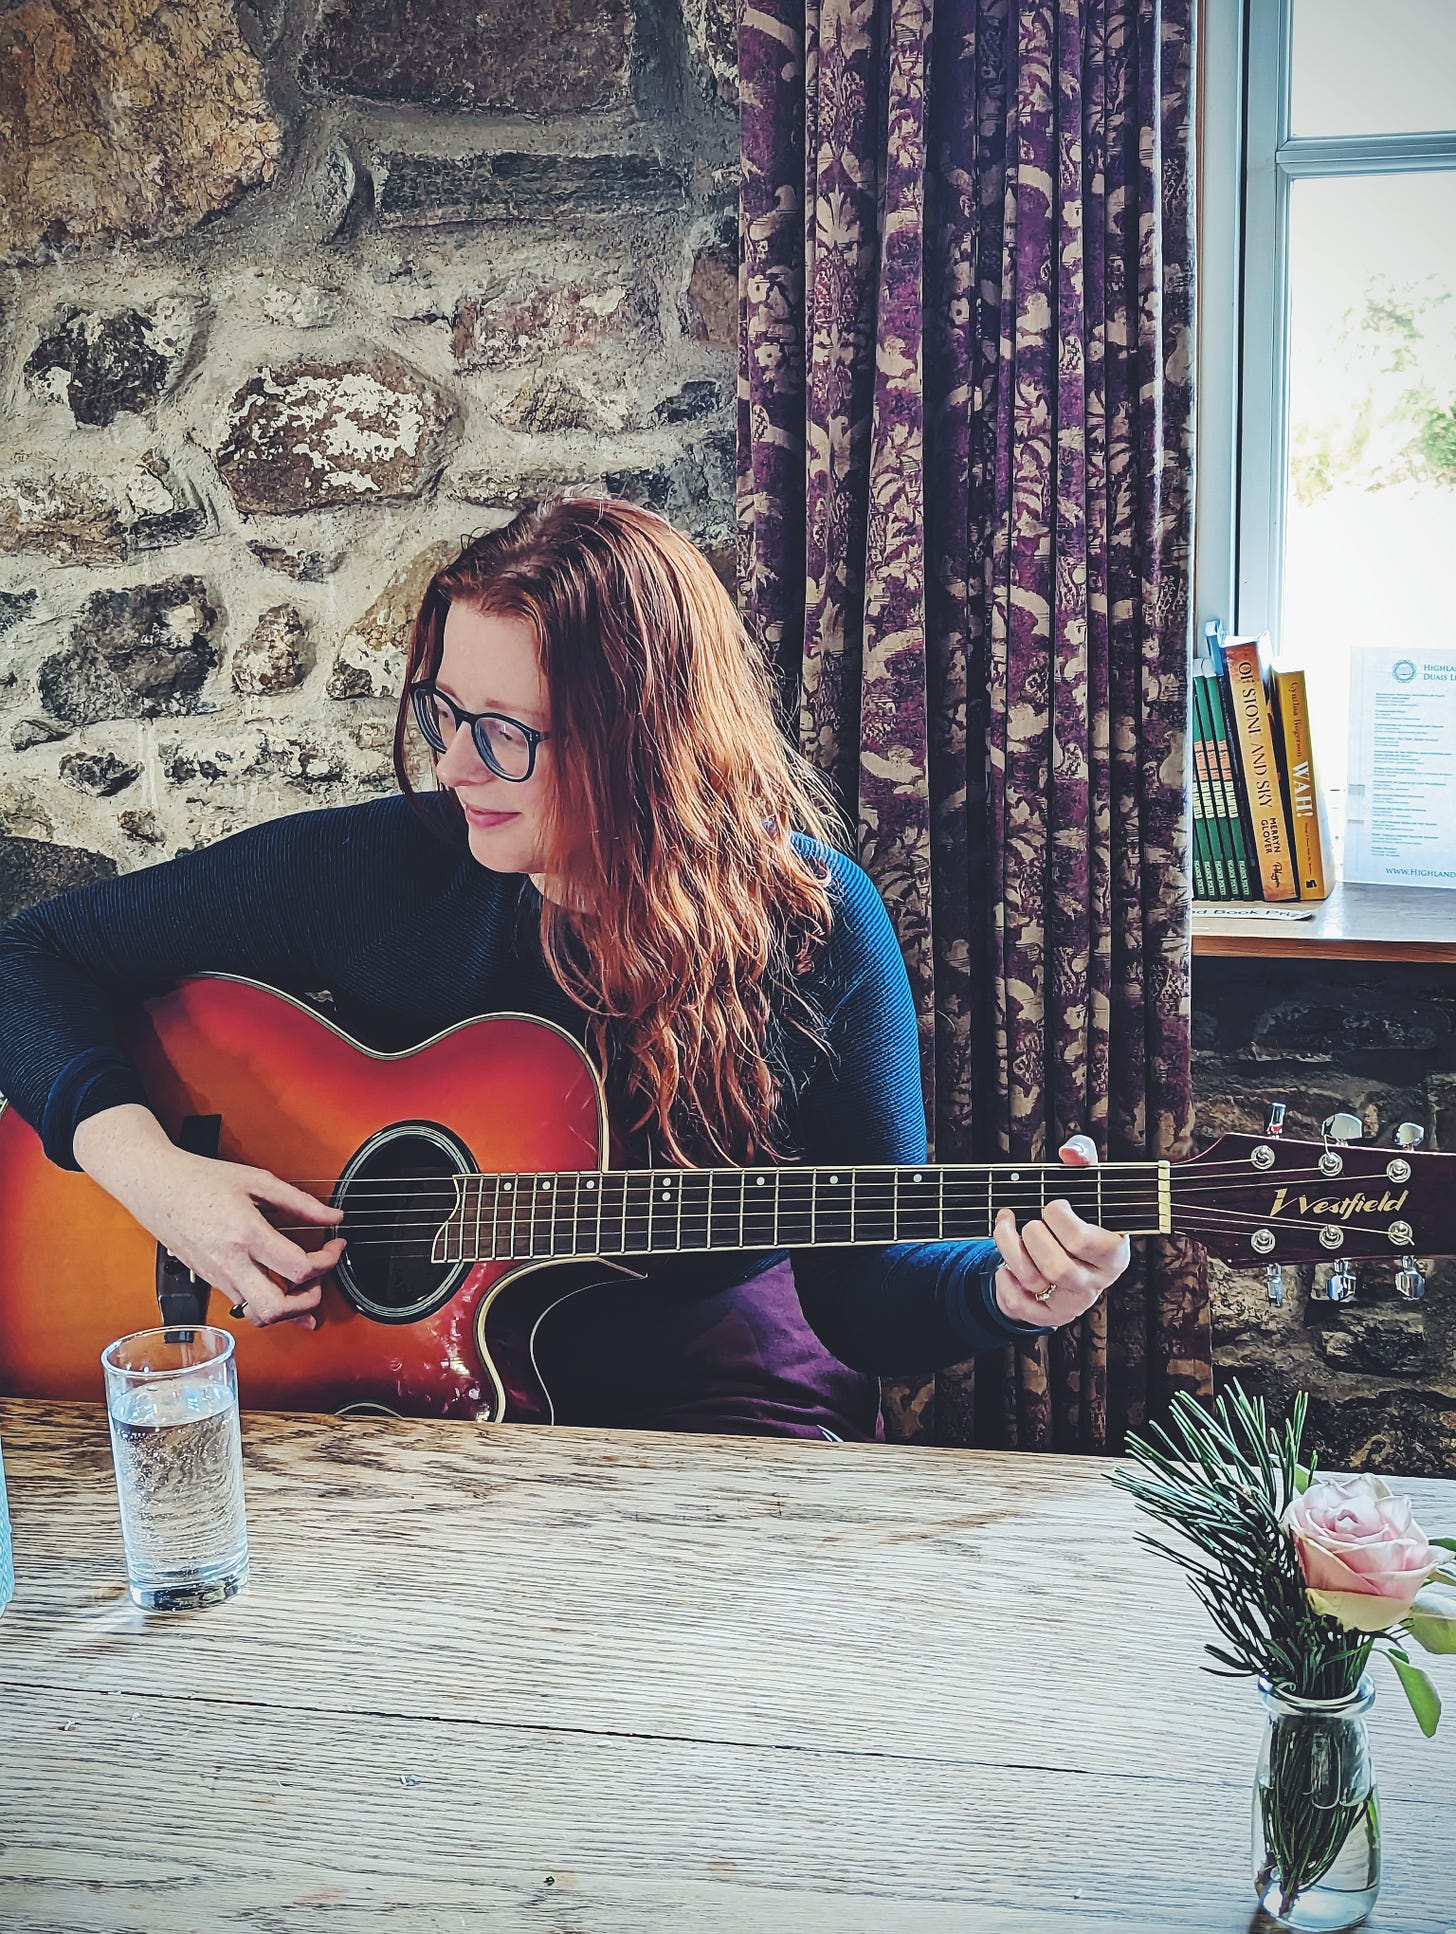 A smiling woman in her thirties is playing guitar at a long table. She is happy and content. There are books on the sill behind her and an old stone wall, and long patterened gold and plum curtains. SHe has red hair and blue glasses to match her blue top.